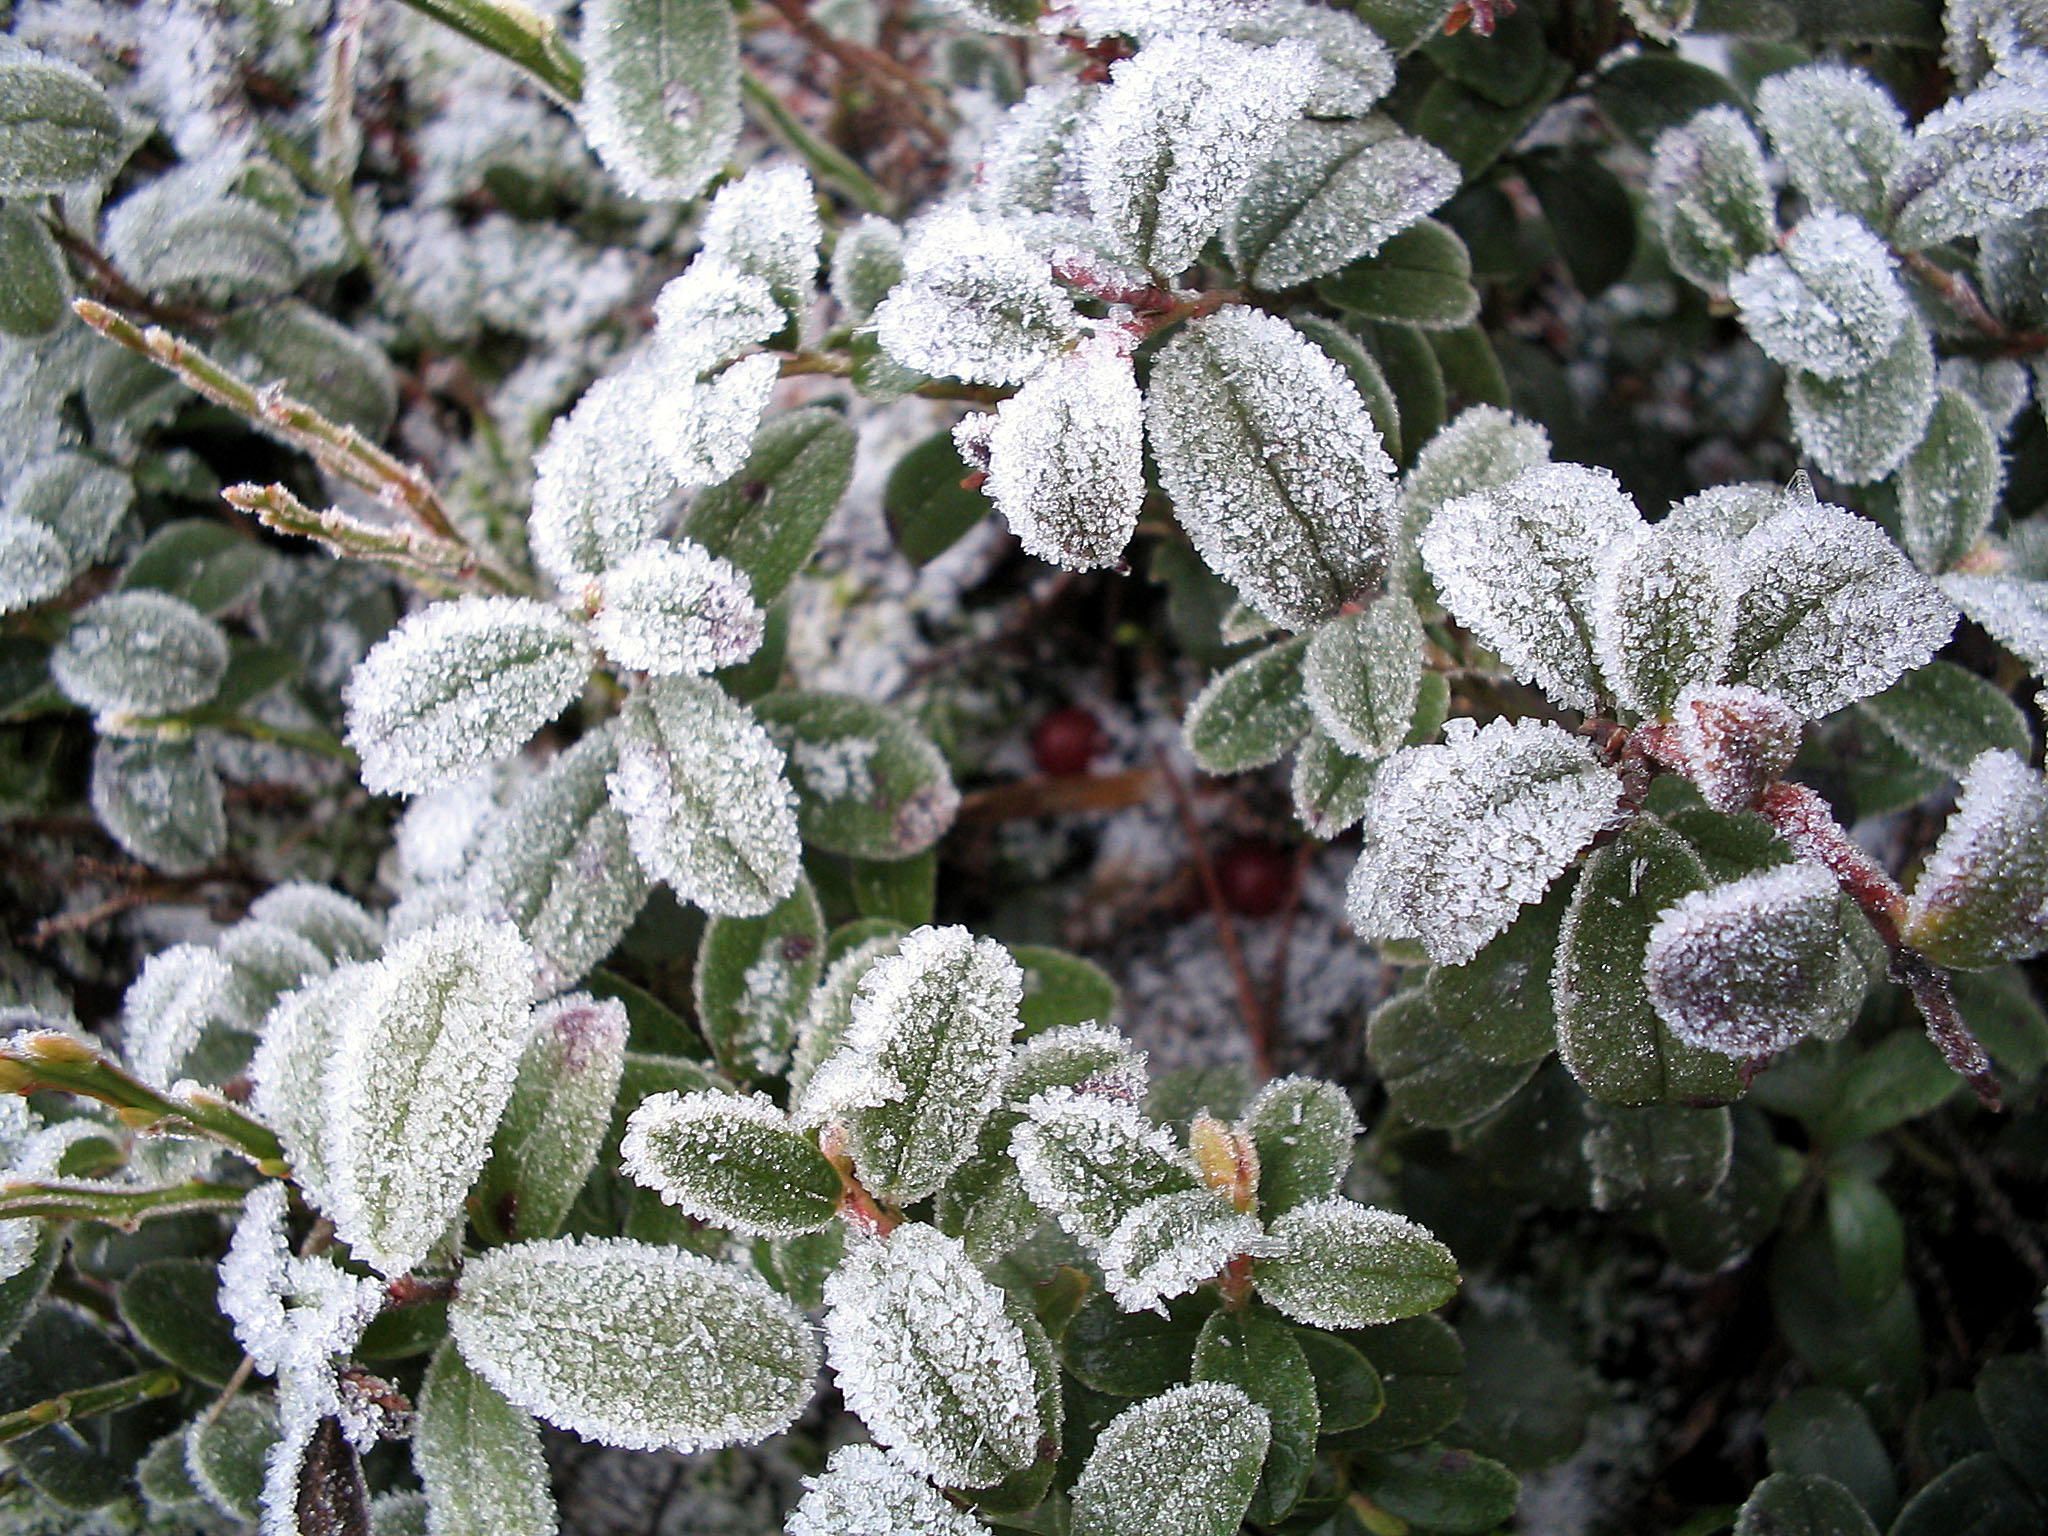 File:Icy LingonBerry.jpg - Wikimedia Commons